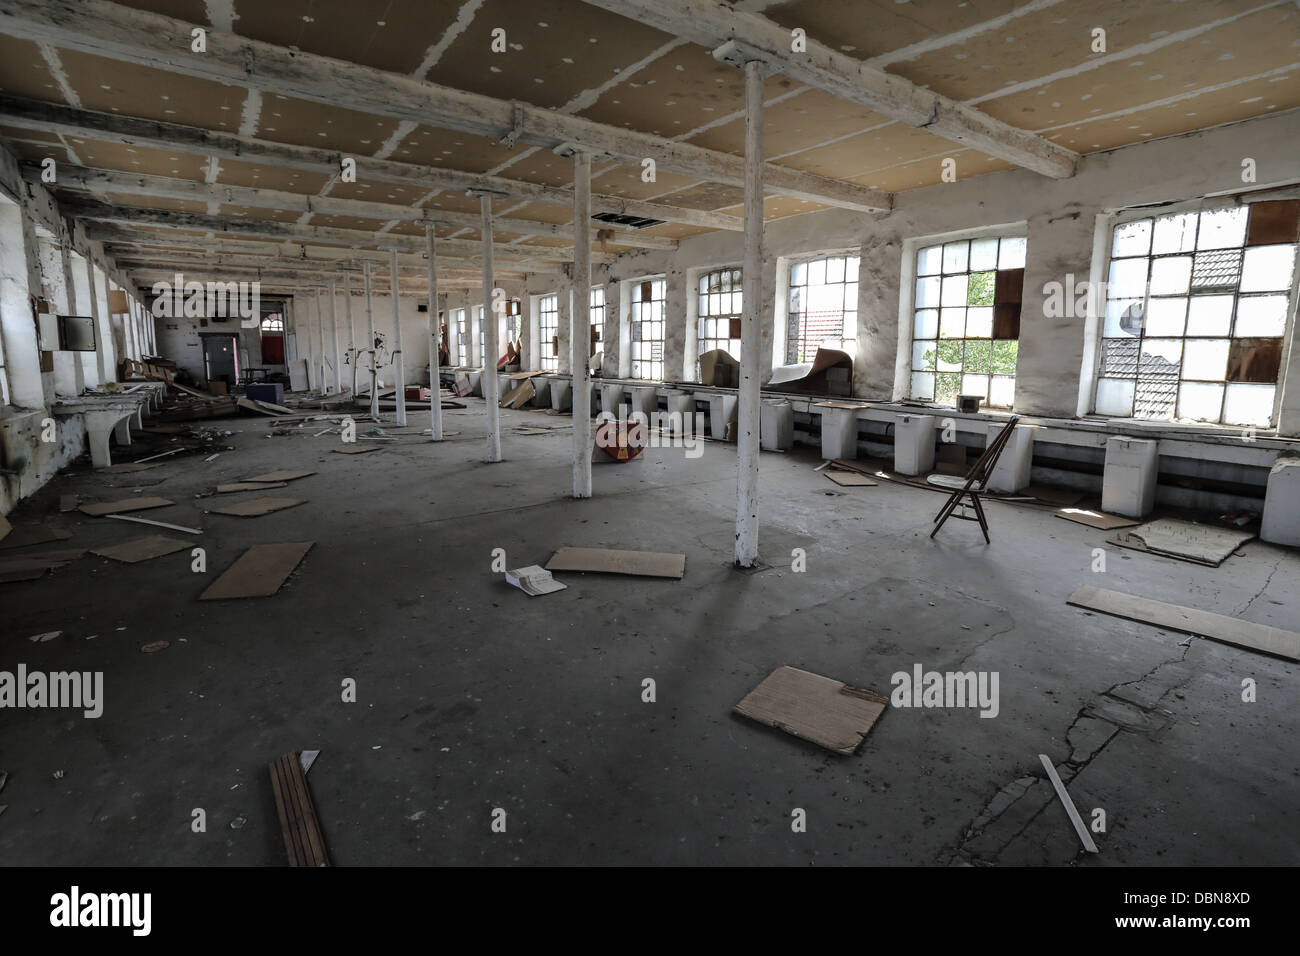 Abandoned factory with broken stuffs on the ground like chairs and wood panels. nobody. Interior Stock Photo